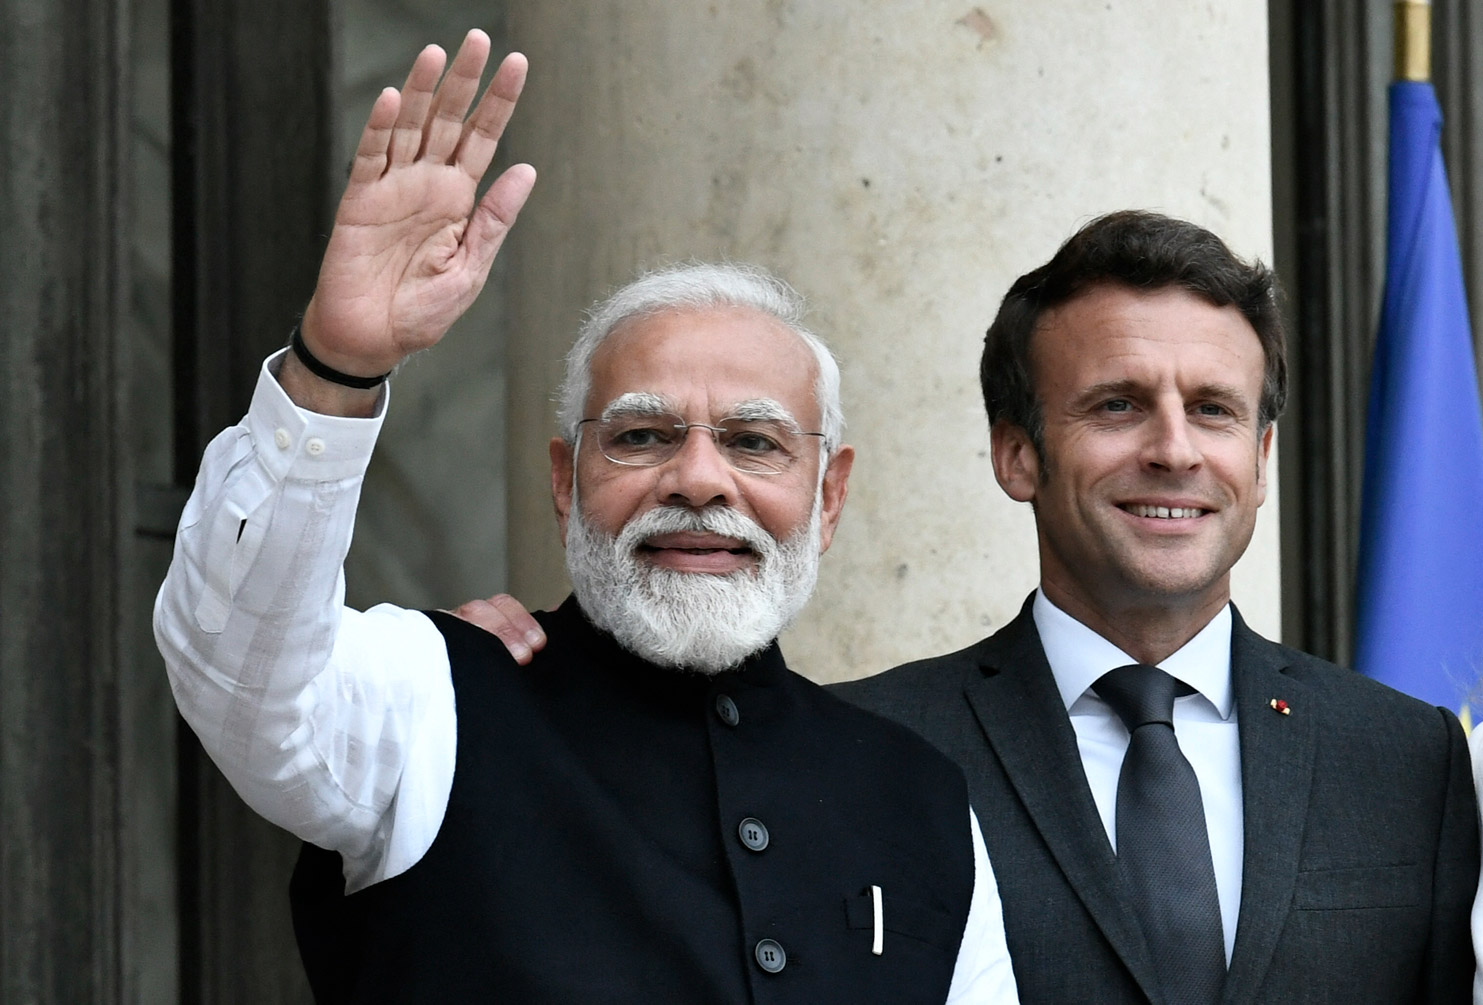 French President Emmanuel Macron welcomes Indian Prime Minister Narendra Modi at the Elysee Palace in Paris, France on May 4.